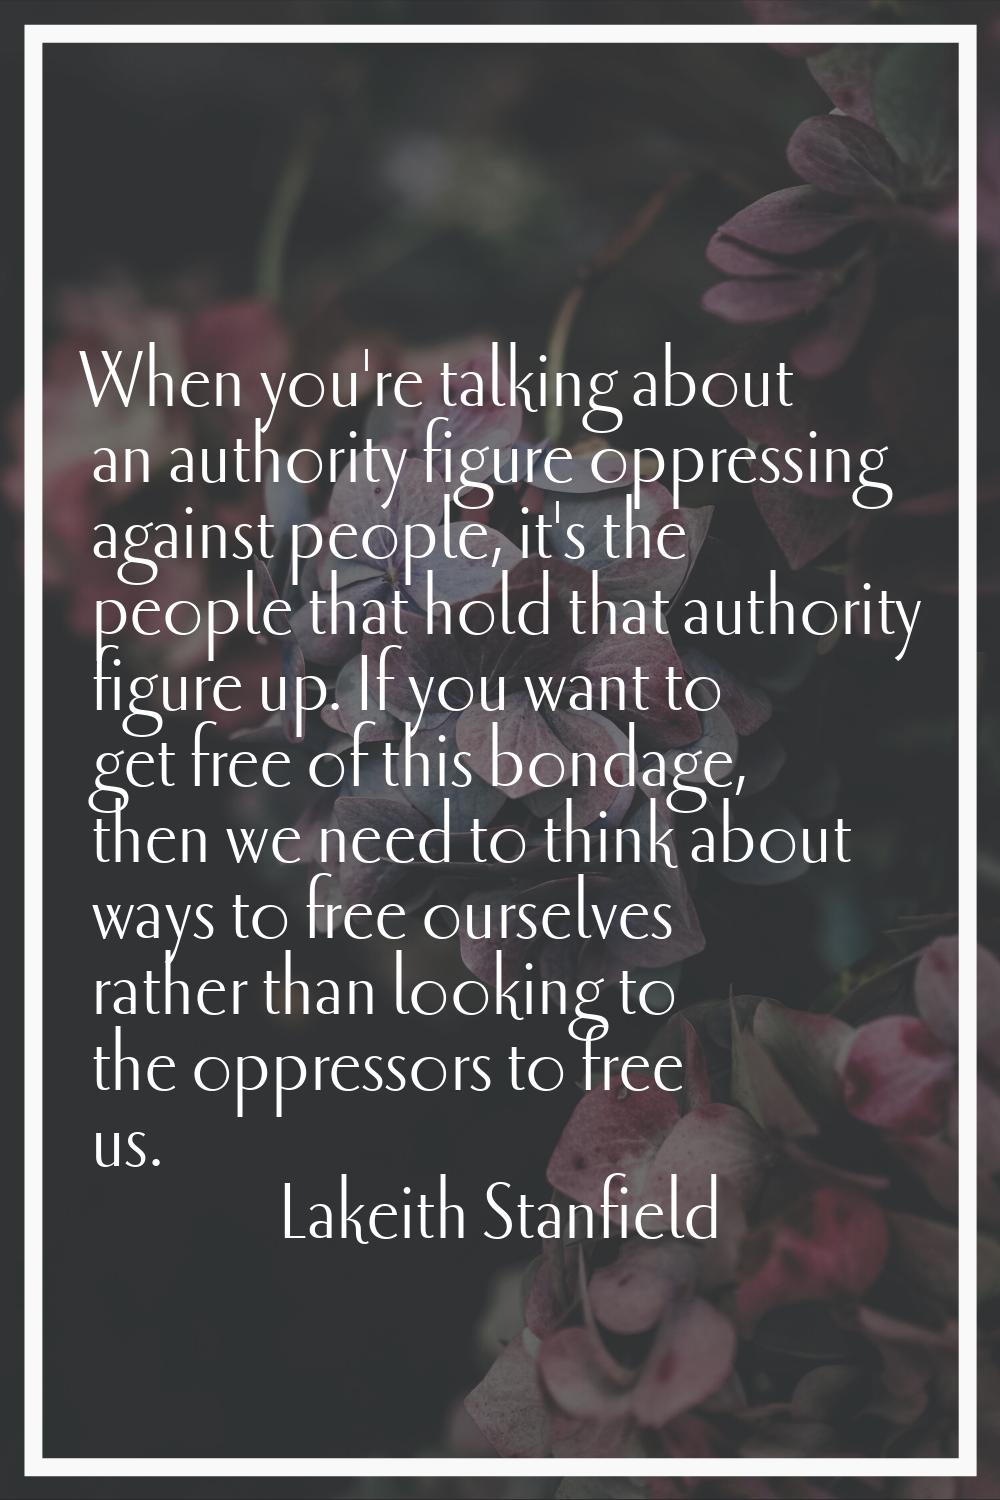 When you're talking about an authority figure oppressing against people, it's the people that hold 